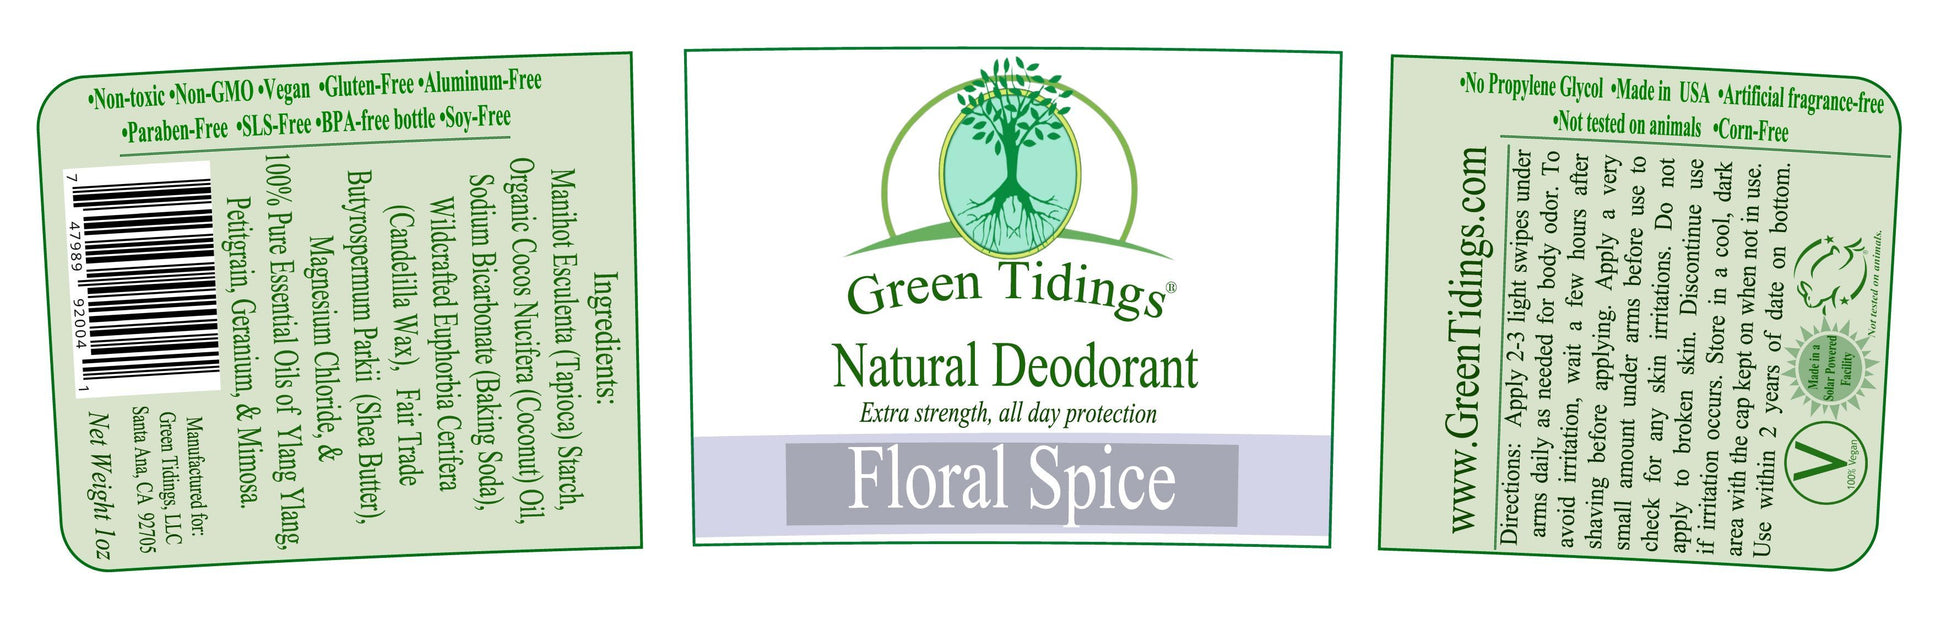 Green Tidings All Natural Deodorant- Floral Spice, 1 Ounce - Green Tidings